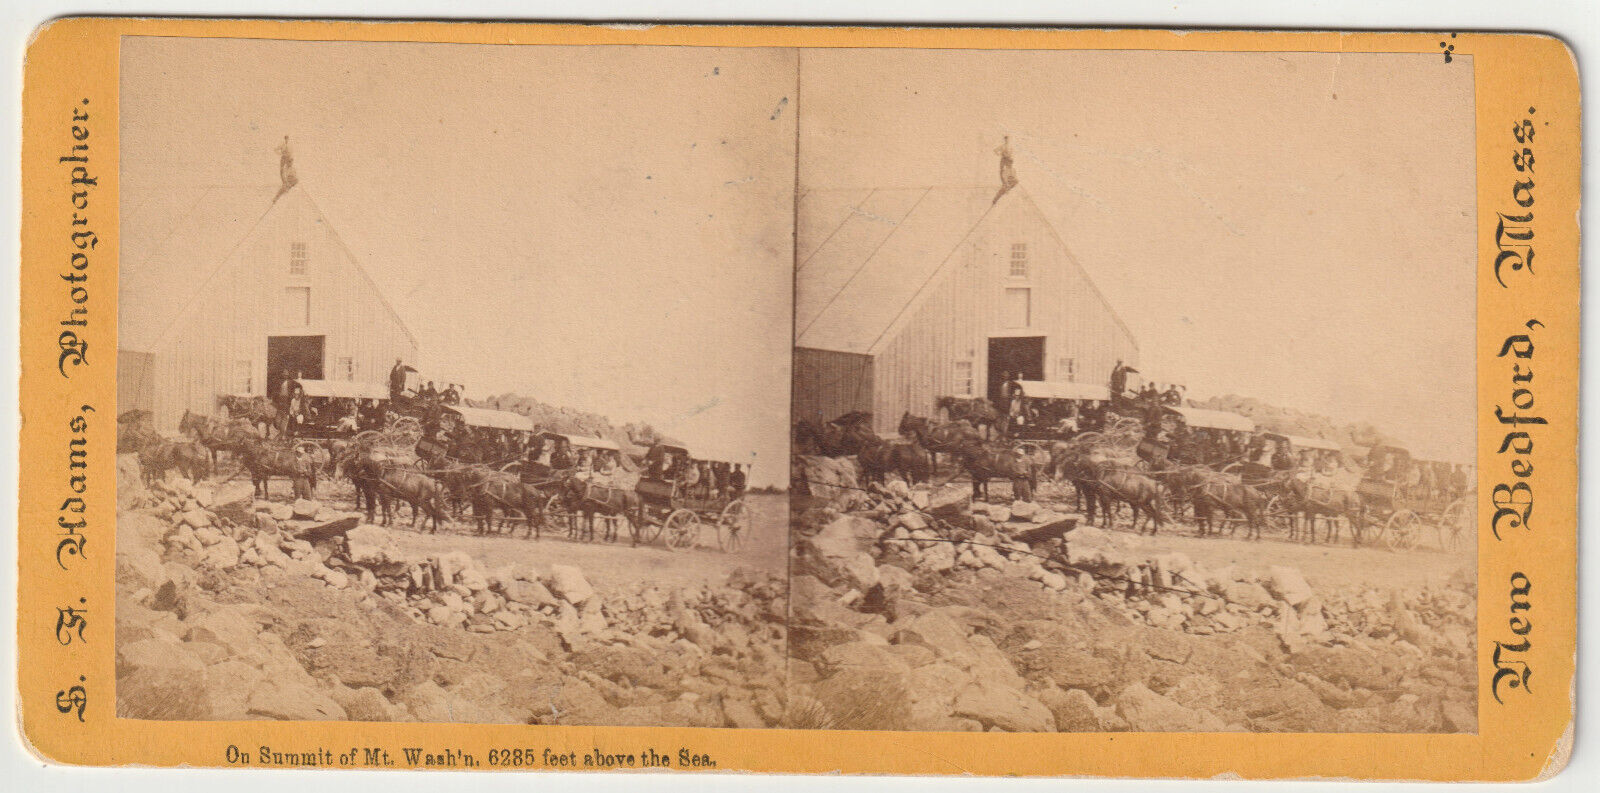 TIP TOP HOUSE - TEAMS OF HORSES/WAGONS/ PEOPLE - MT WASHINGTON - WHITE MOUNTAINS